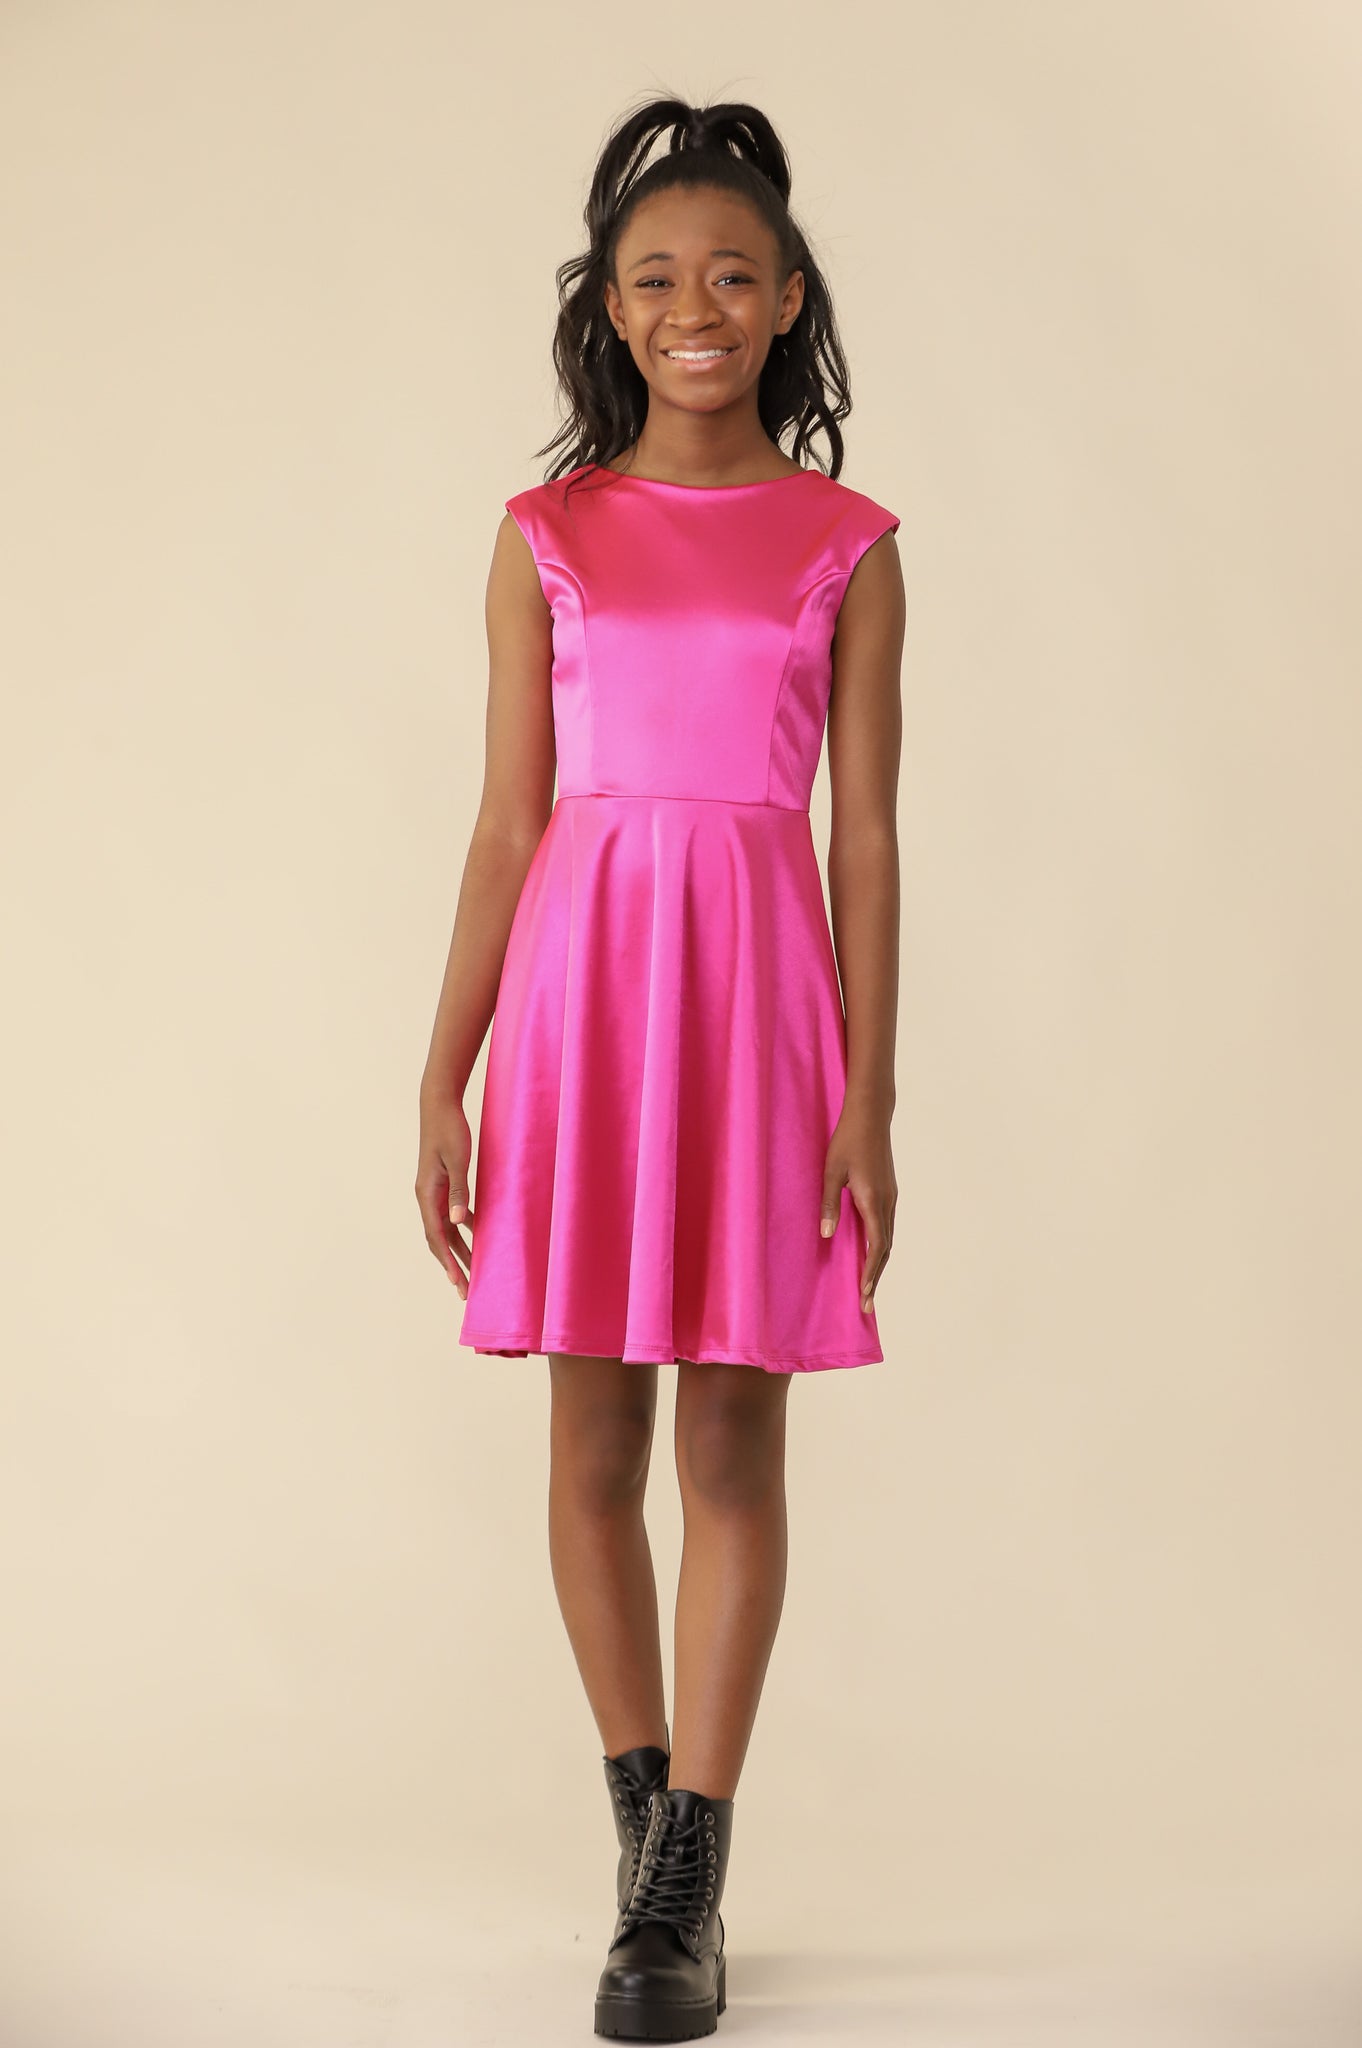 The cap sleeve satin fit and flare dress is shown in fuchsia with high neck line, shoulder coverage and lower v-back detailing for a chic and sophisticated look. This dress can be worn to a more conservative special occasion event like cotillion, graduation, or religious service like a bat mitzvah service or church ceremony.